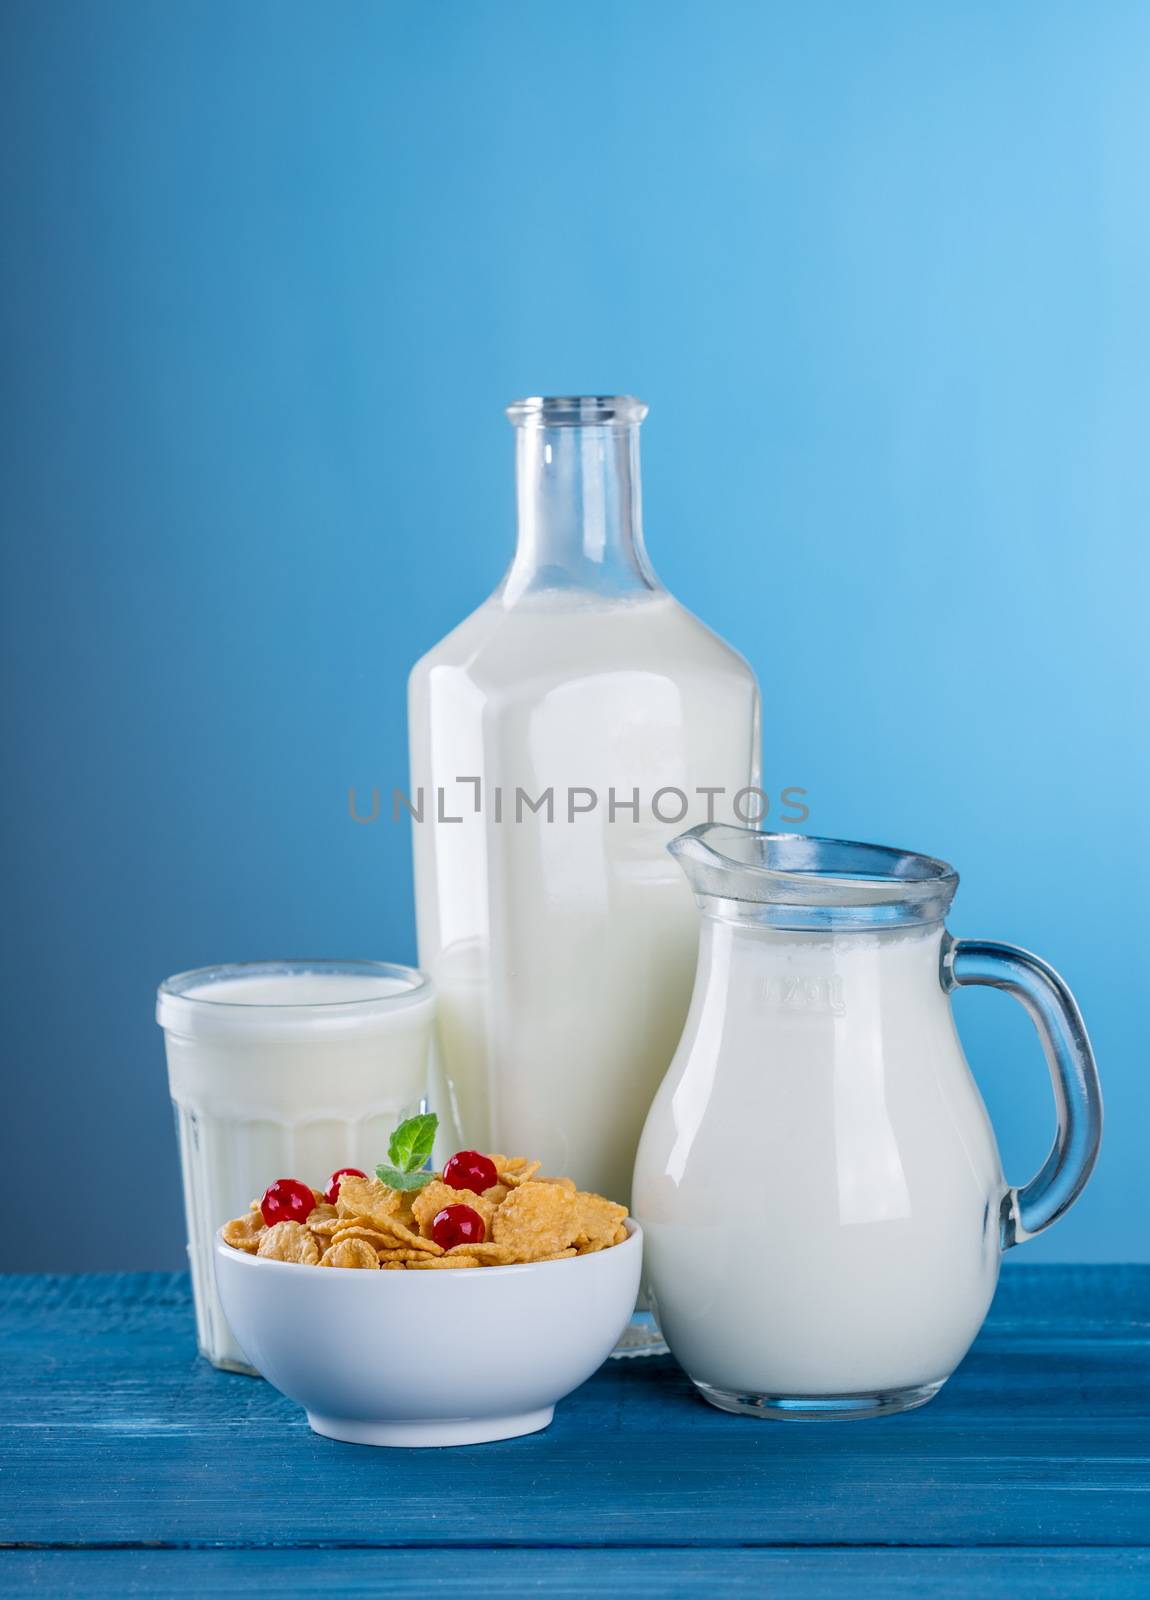 In images A glass of milk and a milk jug on plaid tablecloth.